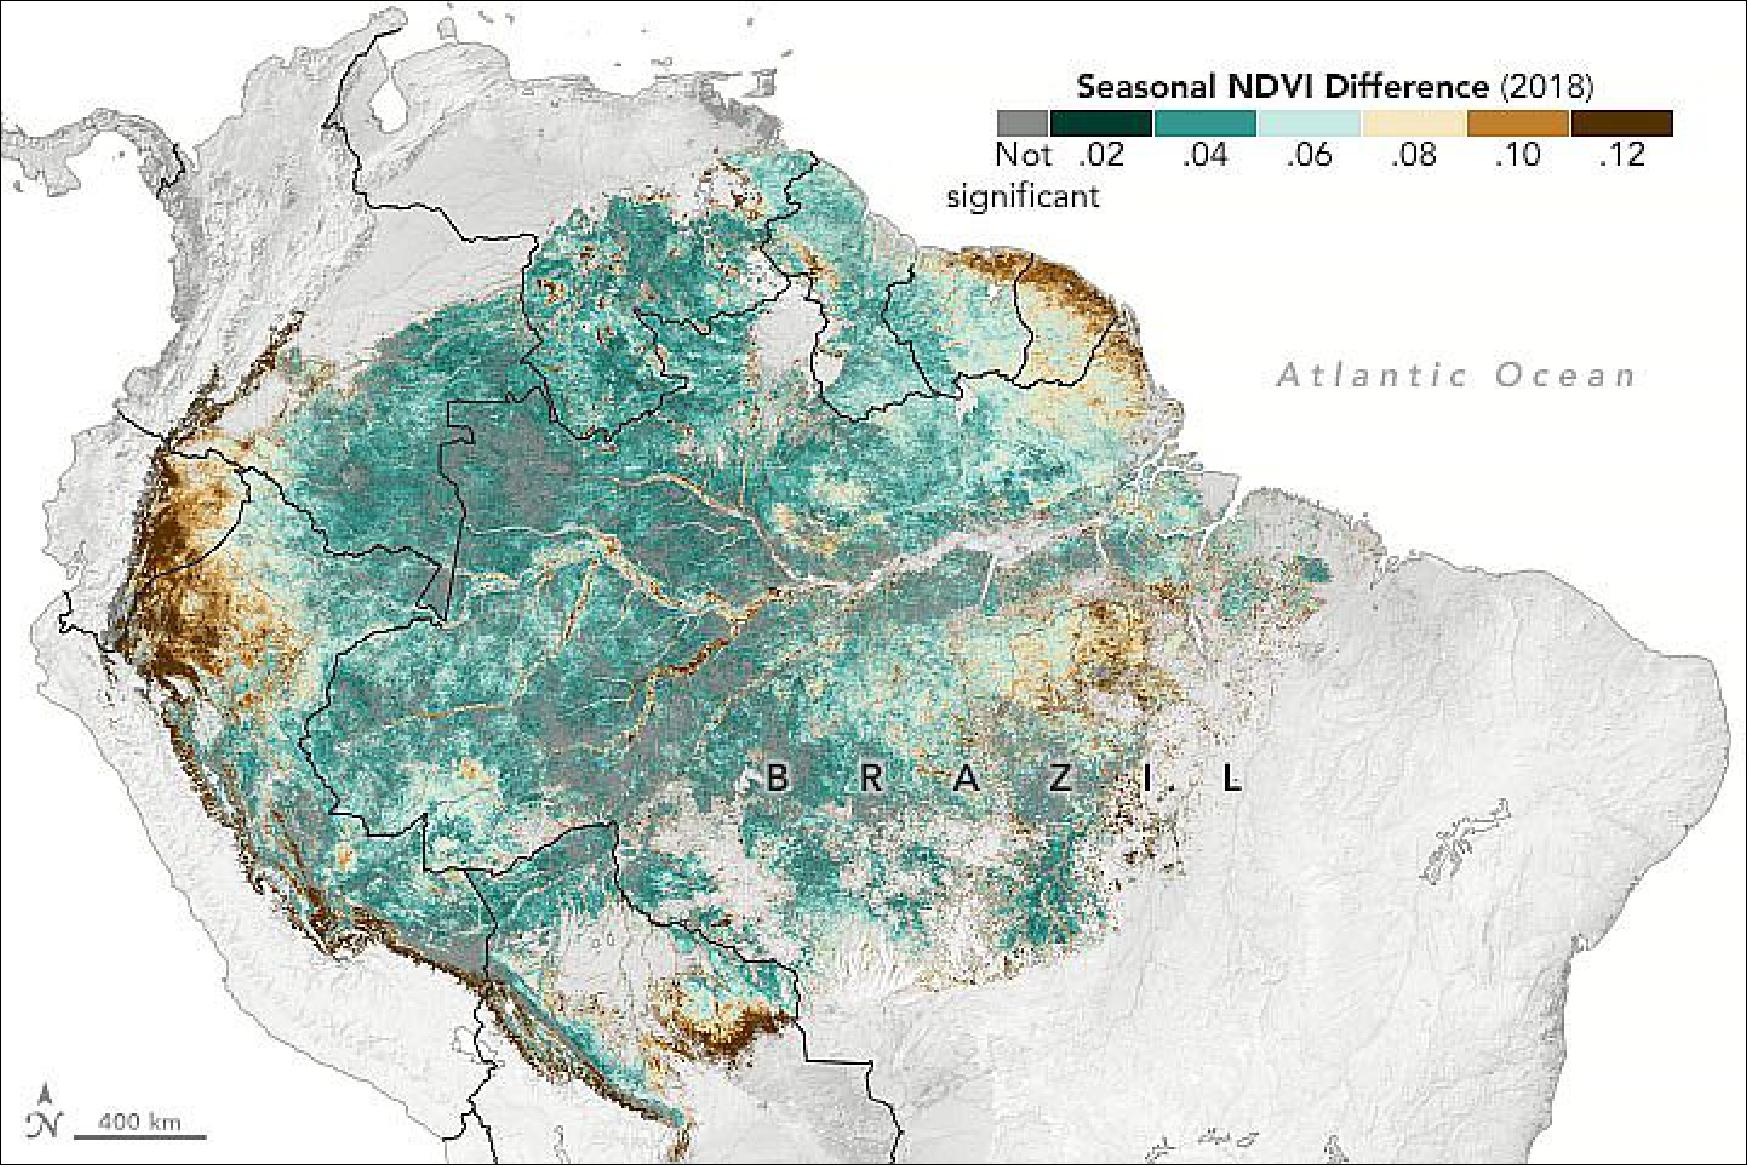 Figure 36: An analysis of geostationary satellite data found a 10 to 15 percent increase in greening around the Amazon rainforest during the dry season (image credit: NASA Earth Observatory images by Joshua Stevens, using data courtesy of Hashimoto, H., et al. (2021), and GOES 16 data from NOAA and the National Centers for Environmental Information (NCEI). Story by Adam Voiland)